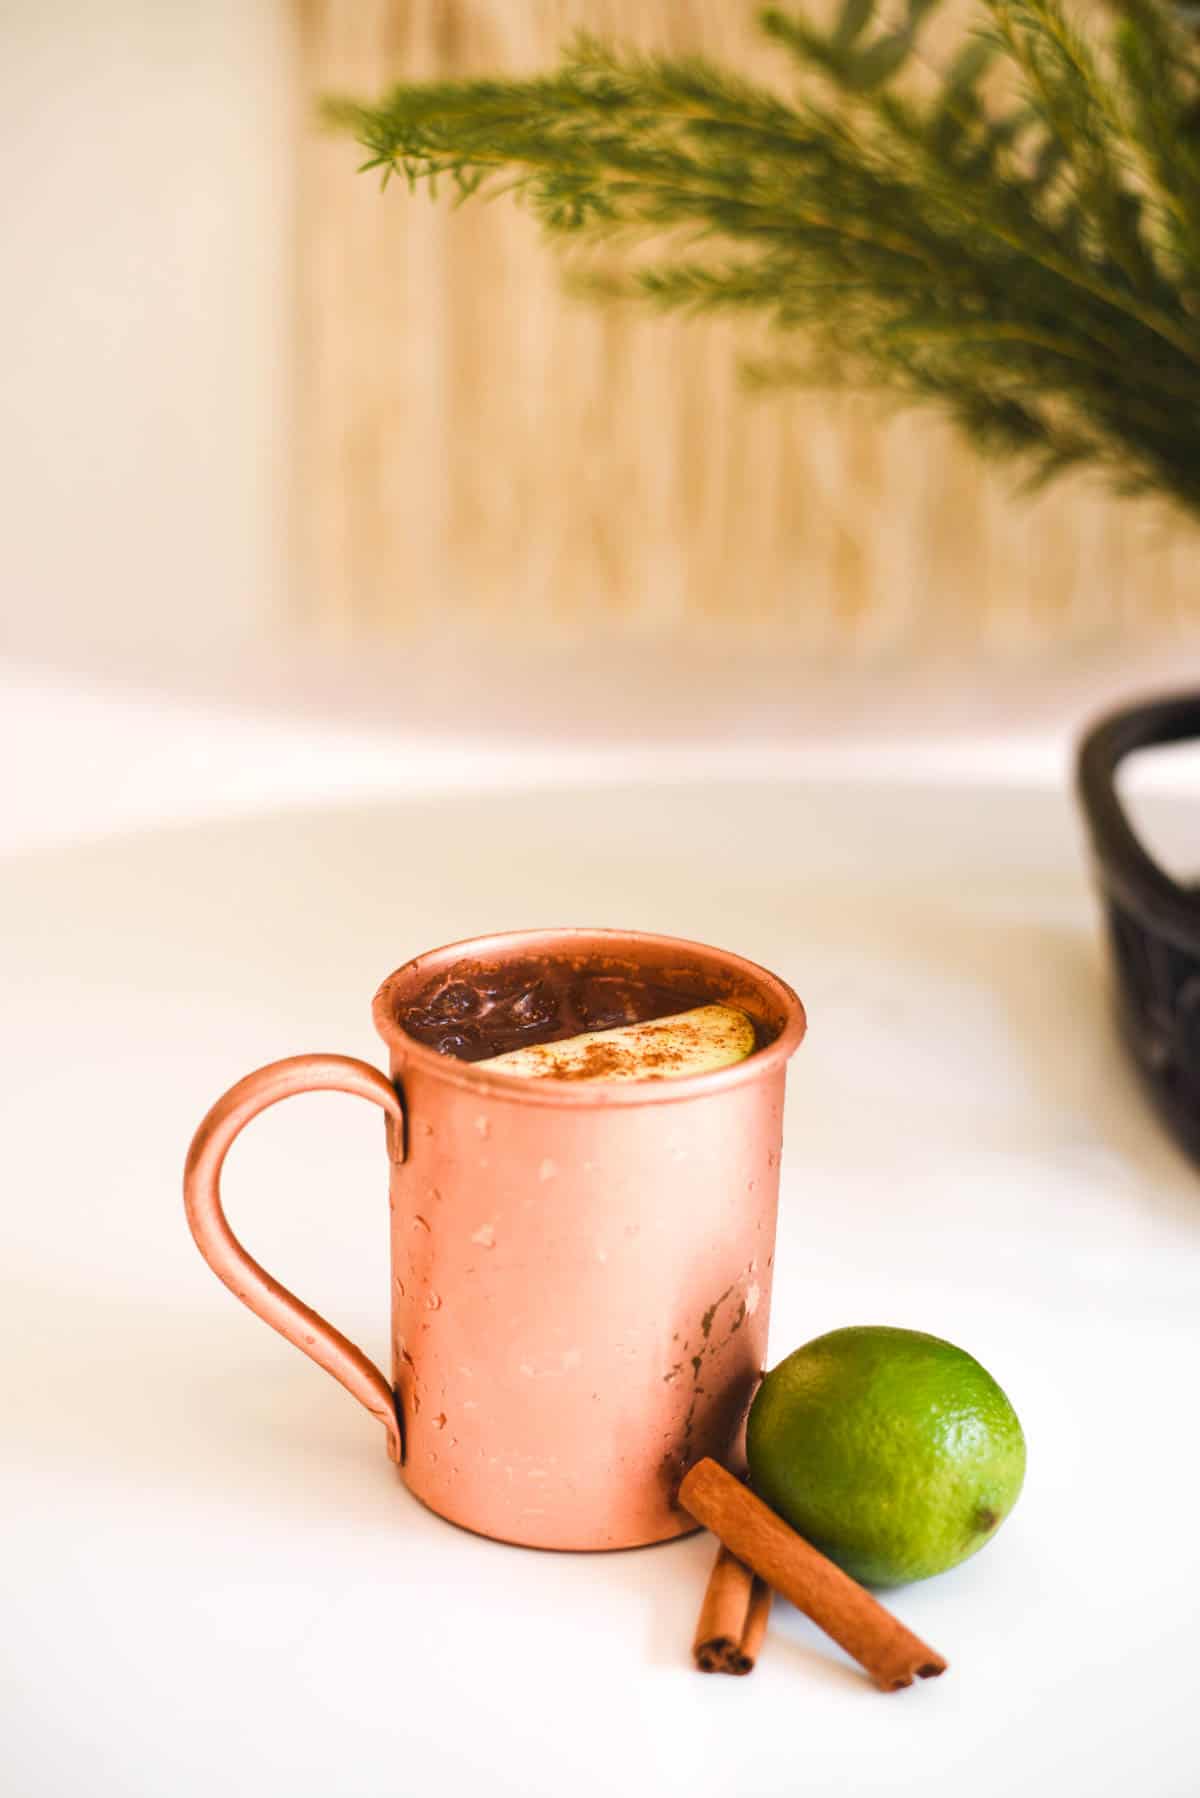 A copper mug on a table with a lime and cinnamon sticks sitting next to it.